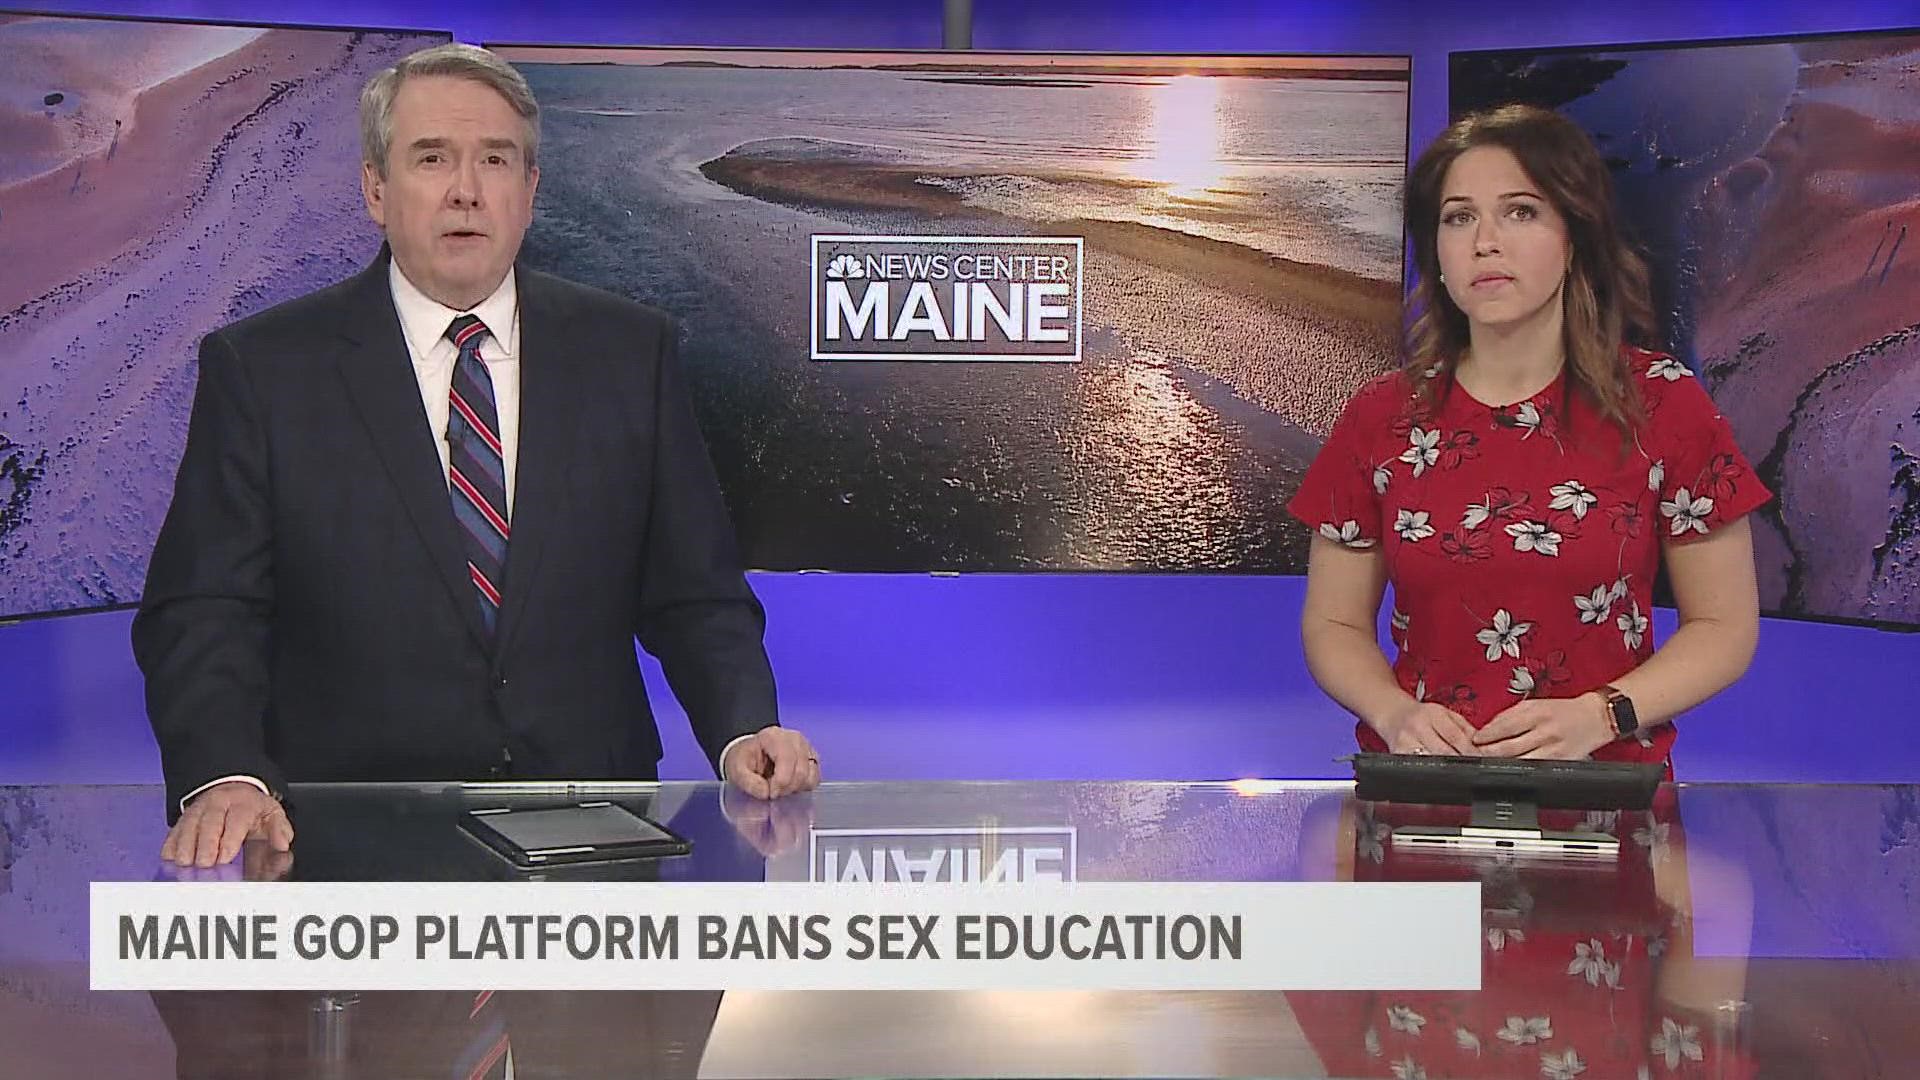 At the Maine Republican State Convention, party leaders and delegates made changes to the platform ahead of the coming election cycle.